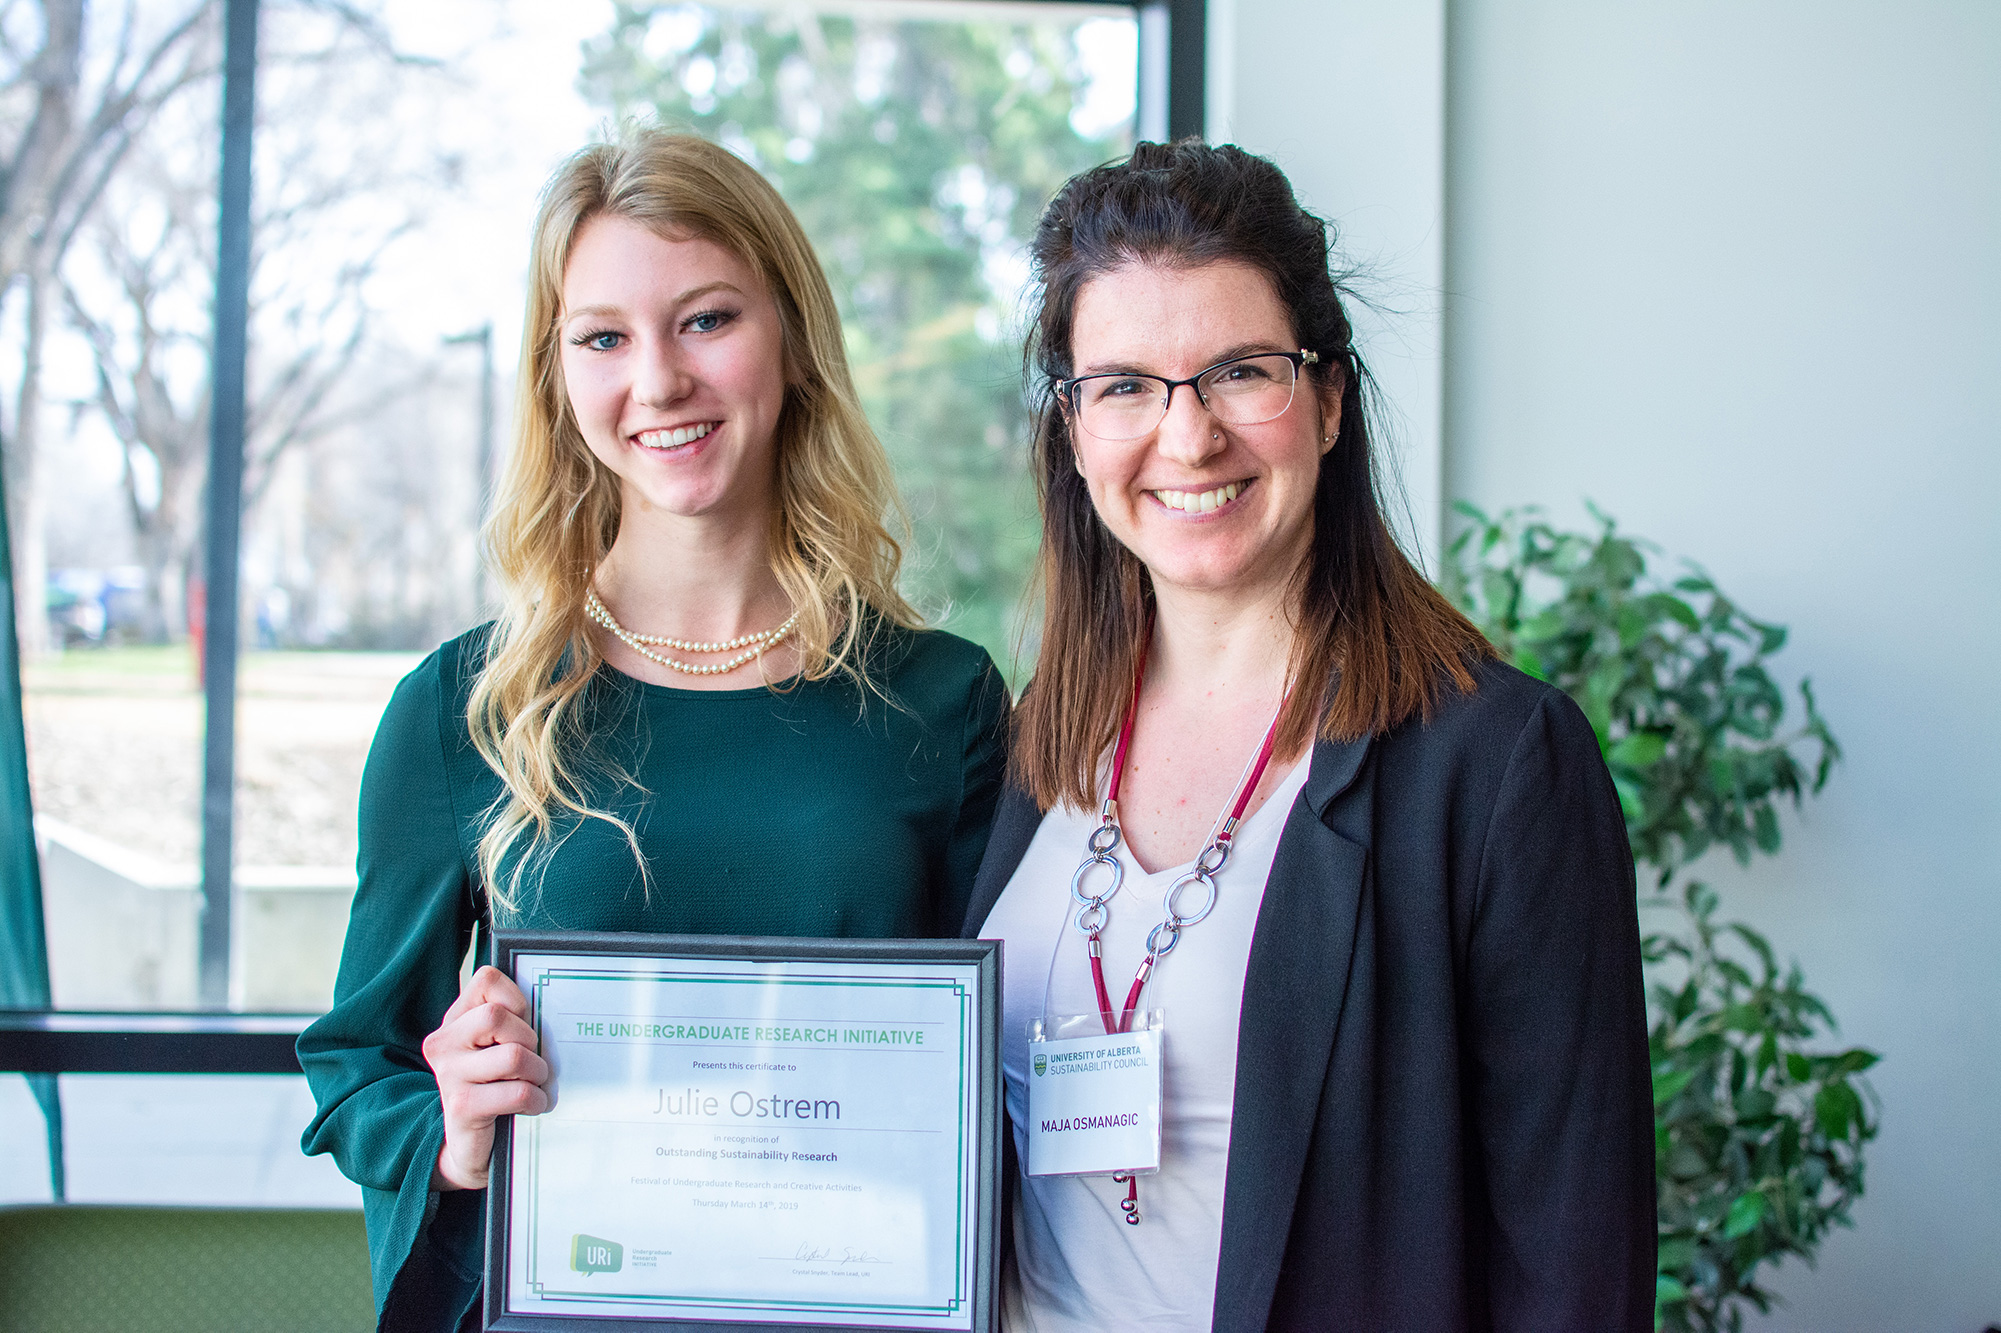 Augustana Campus student Julie Ostrem receives FURCA Outstanding Sustainability Research award from the Sustainability Council's Maja Osmanagic